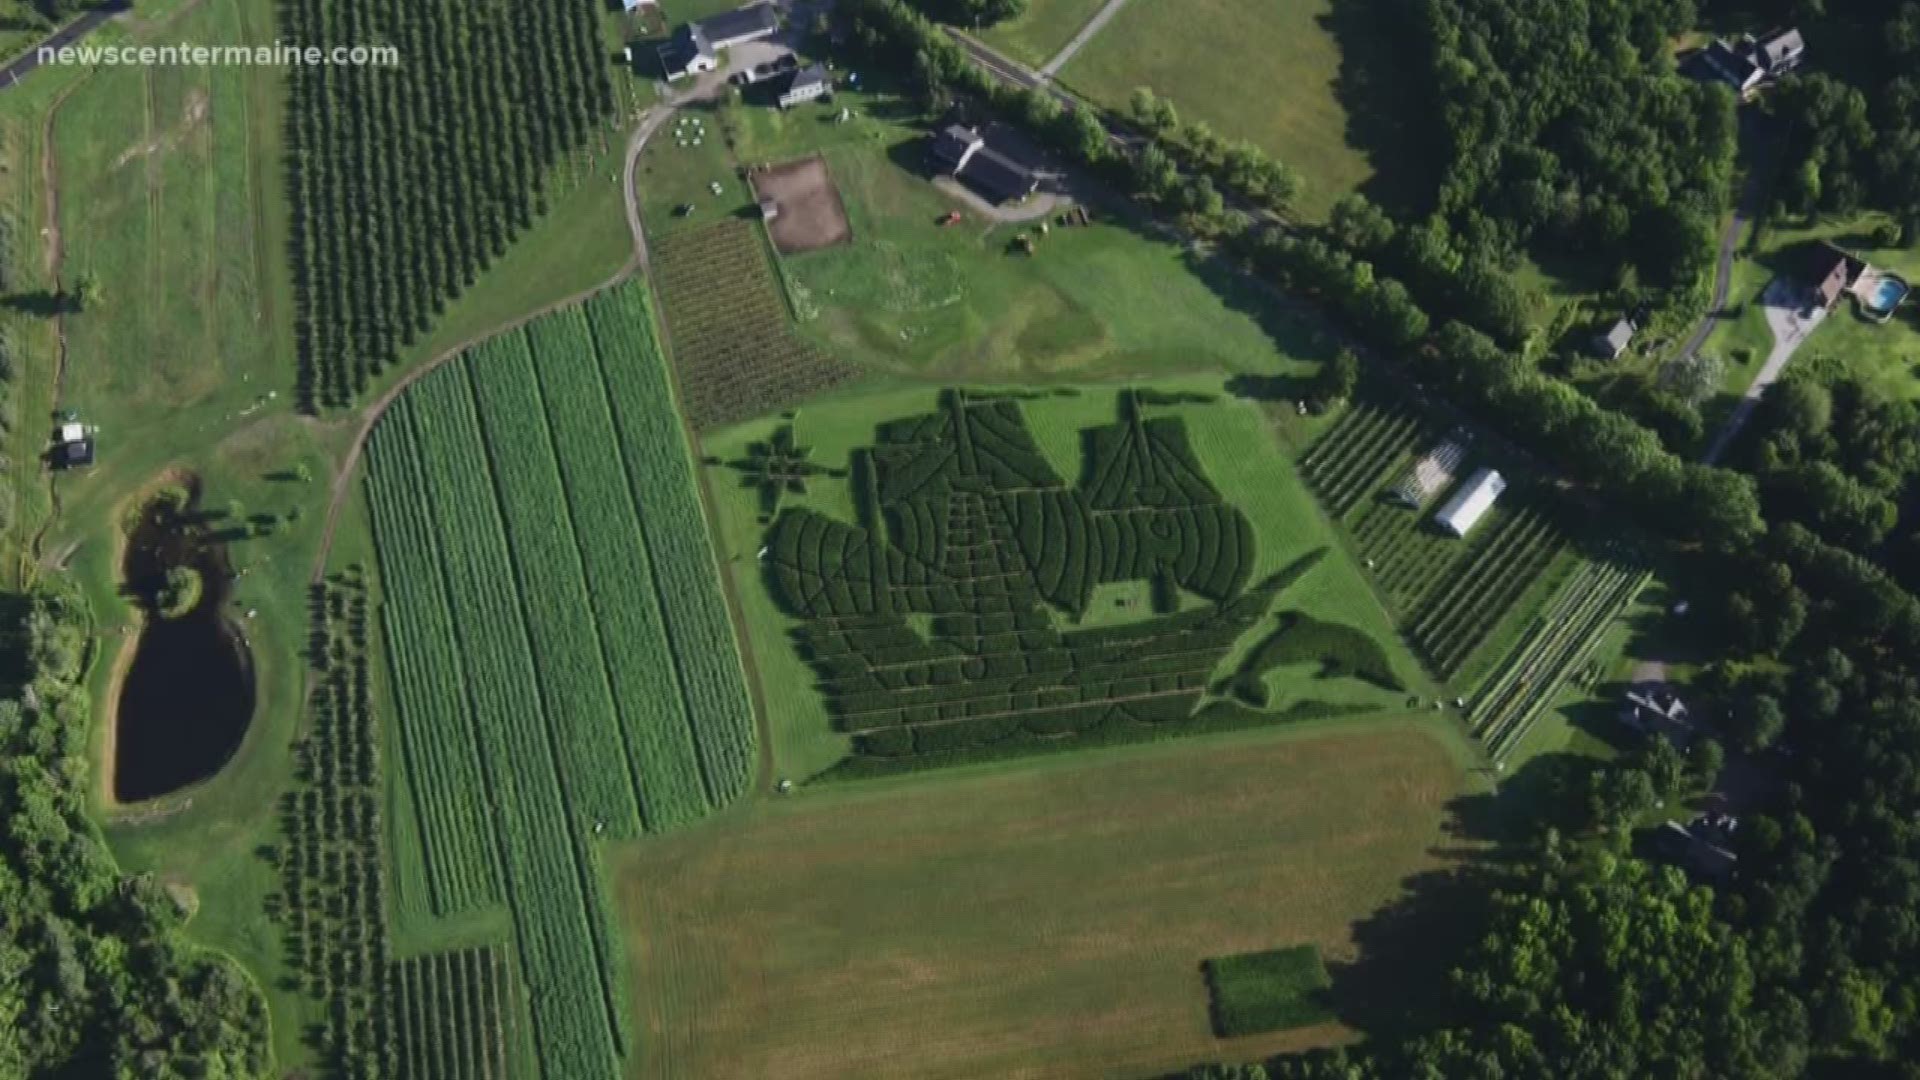 Levant corn maze named top 10 in nation